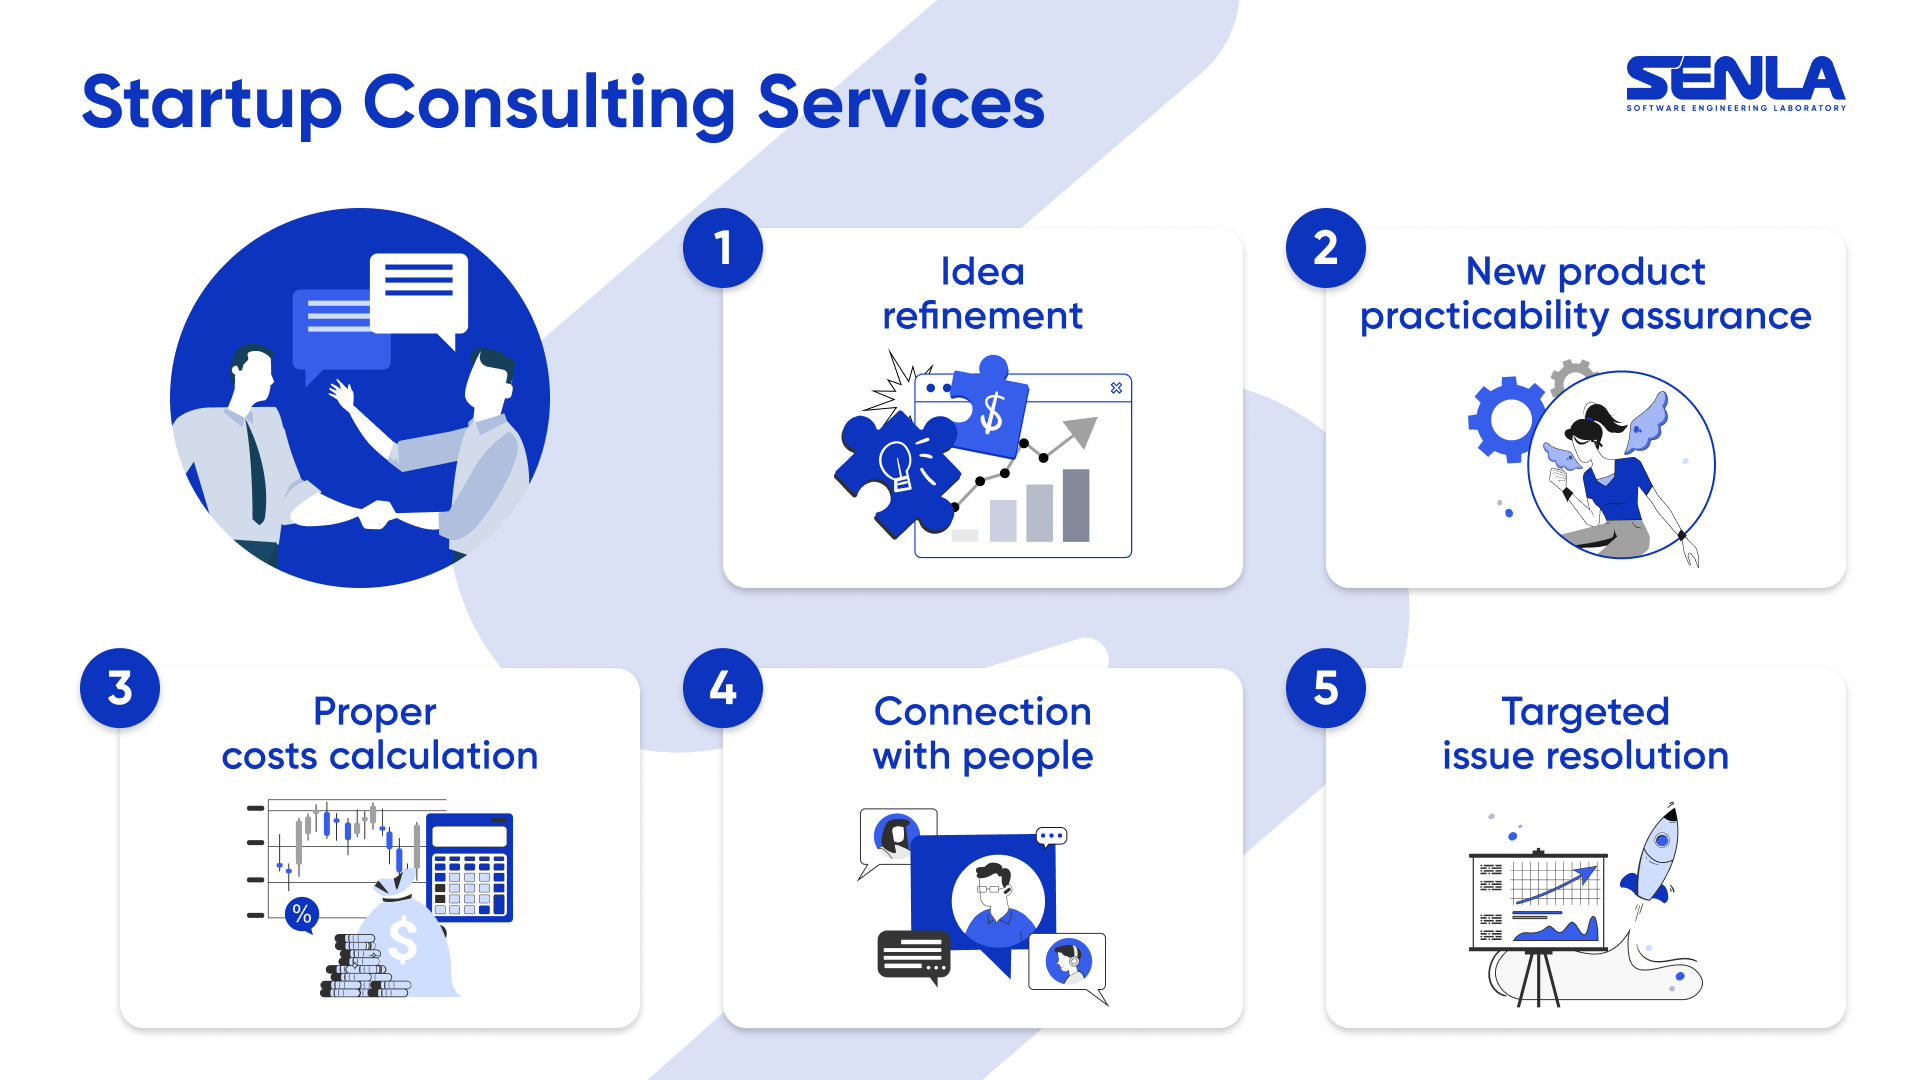 Startup consulting services